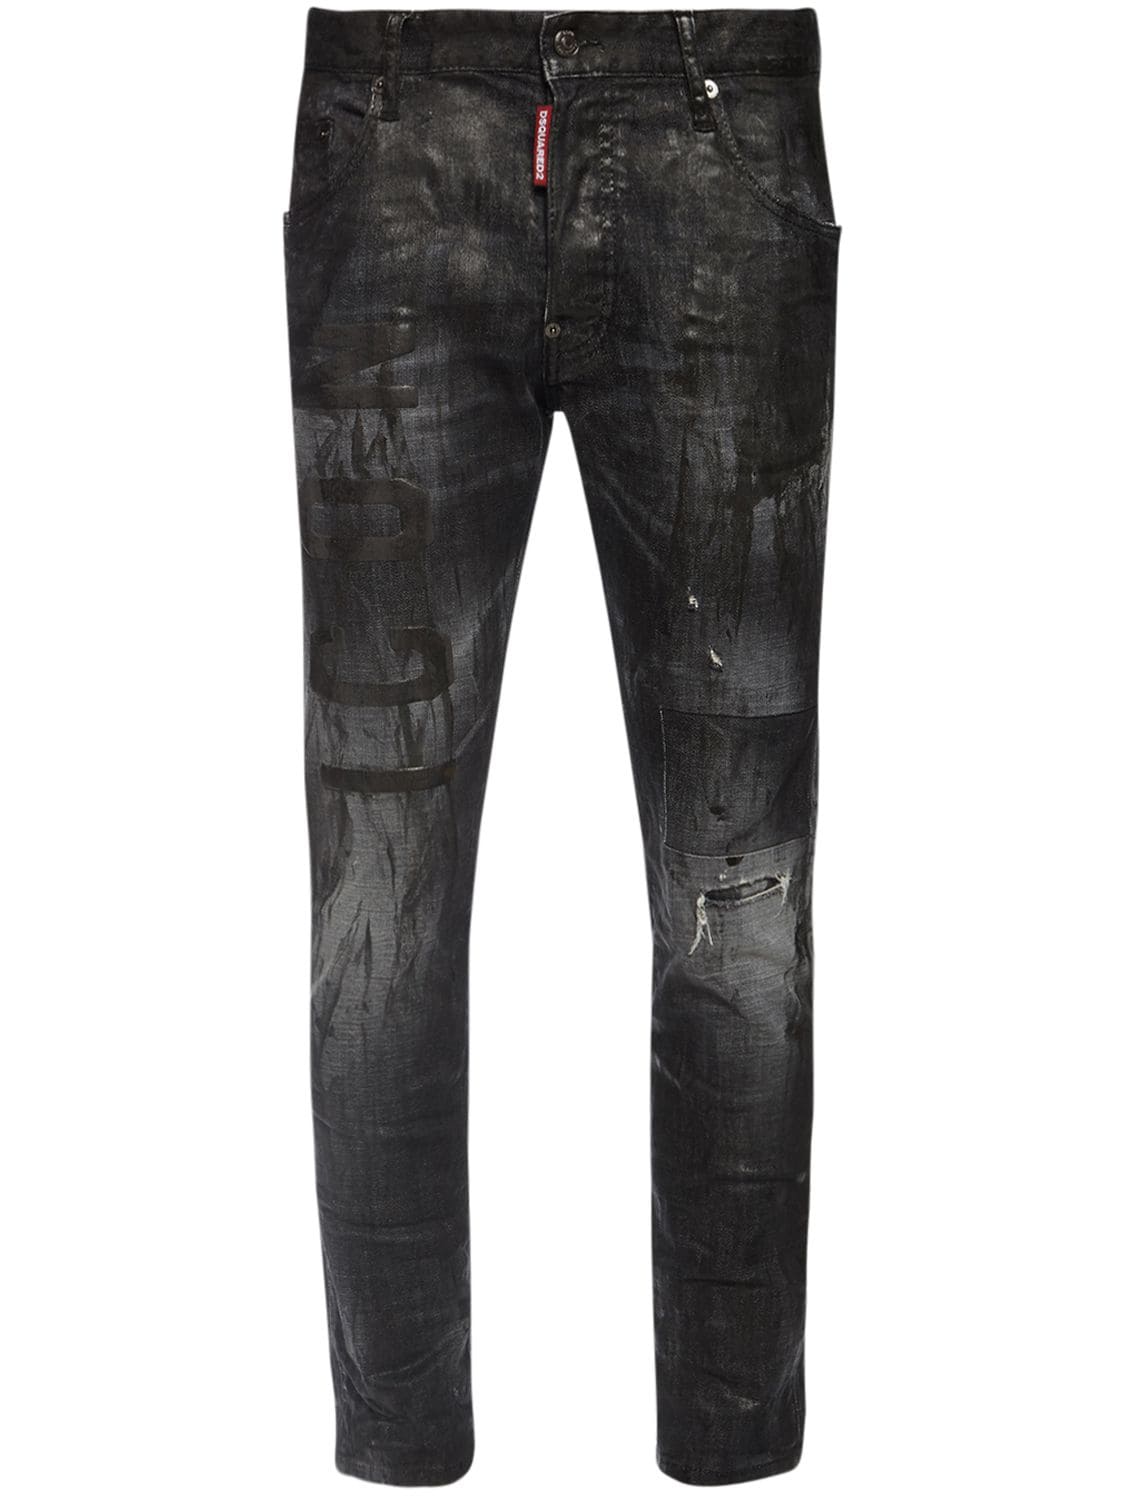 waxed cotton jeans